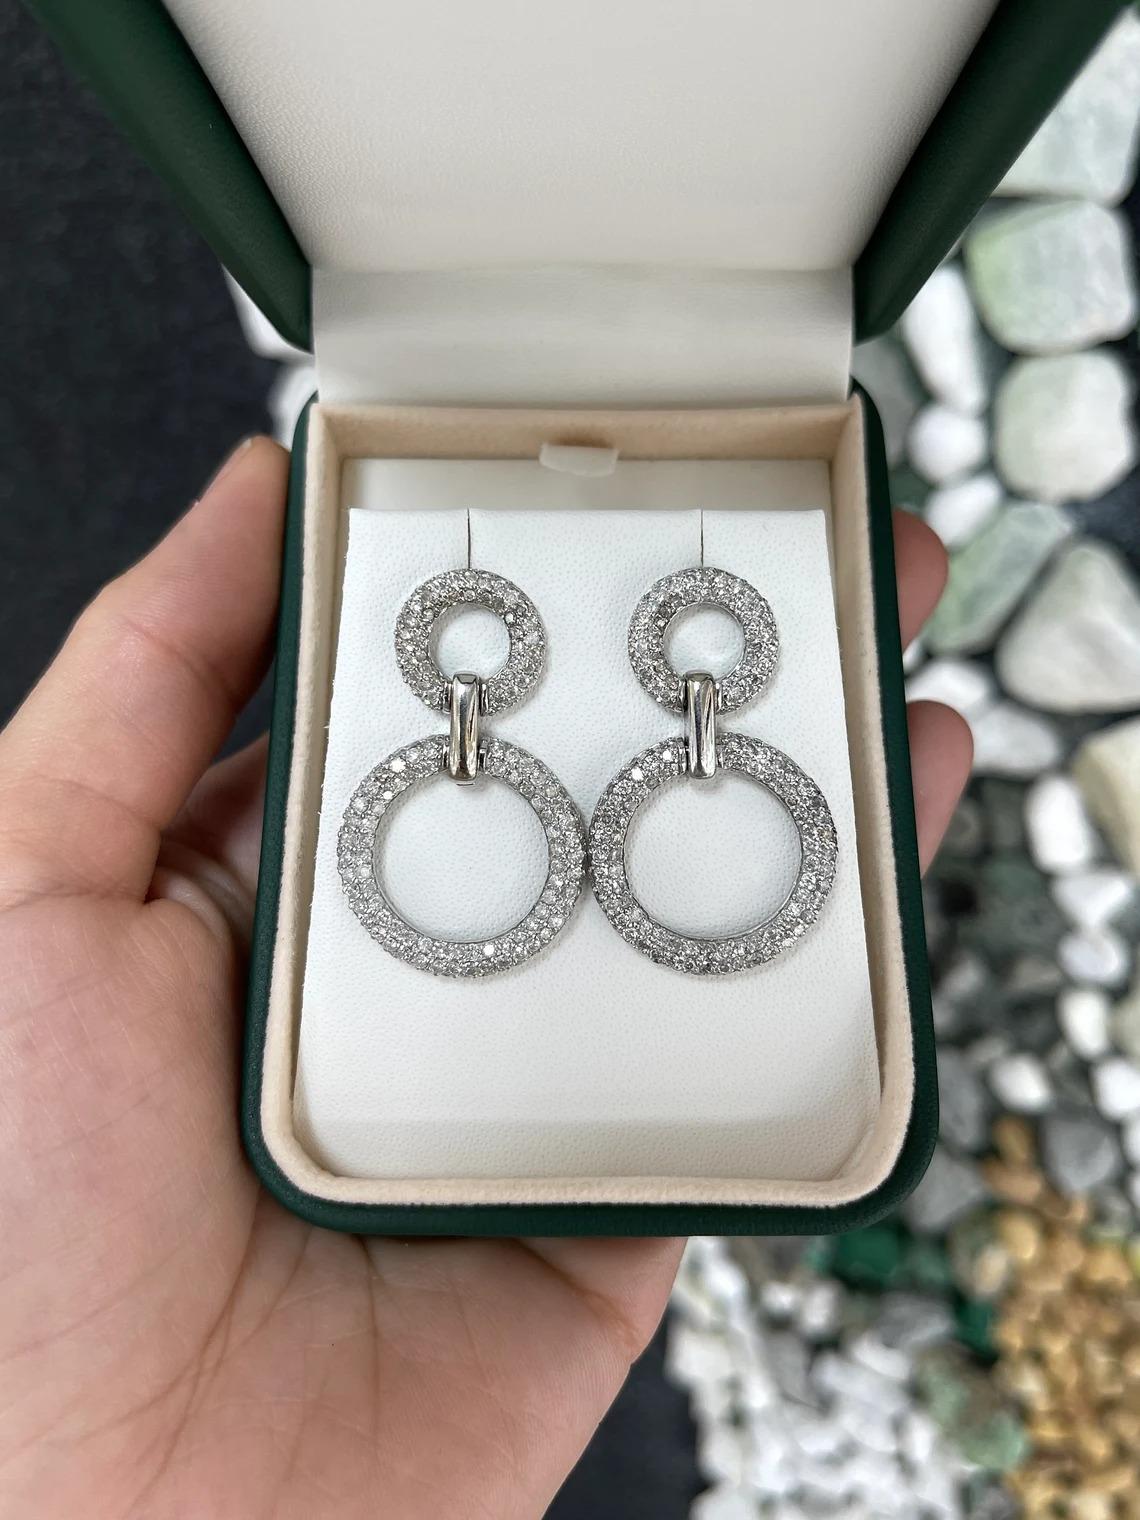 A gorgeous set of diamond drop and dangle hoop earrings. An incredibly impressive set showcasing rows of brilliant round diamonds glimmer from all angles. The earrings are lightweight and so easy to wear for an eye-catching look.

Setting Style: